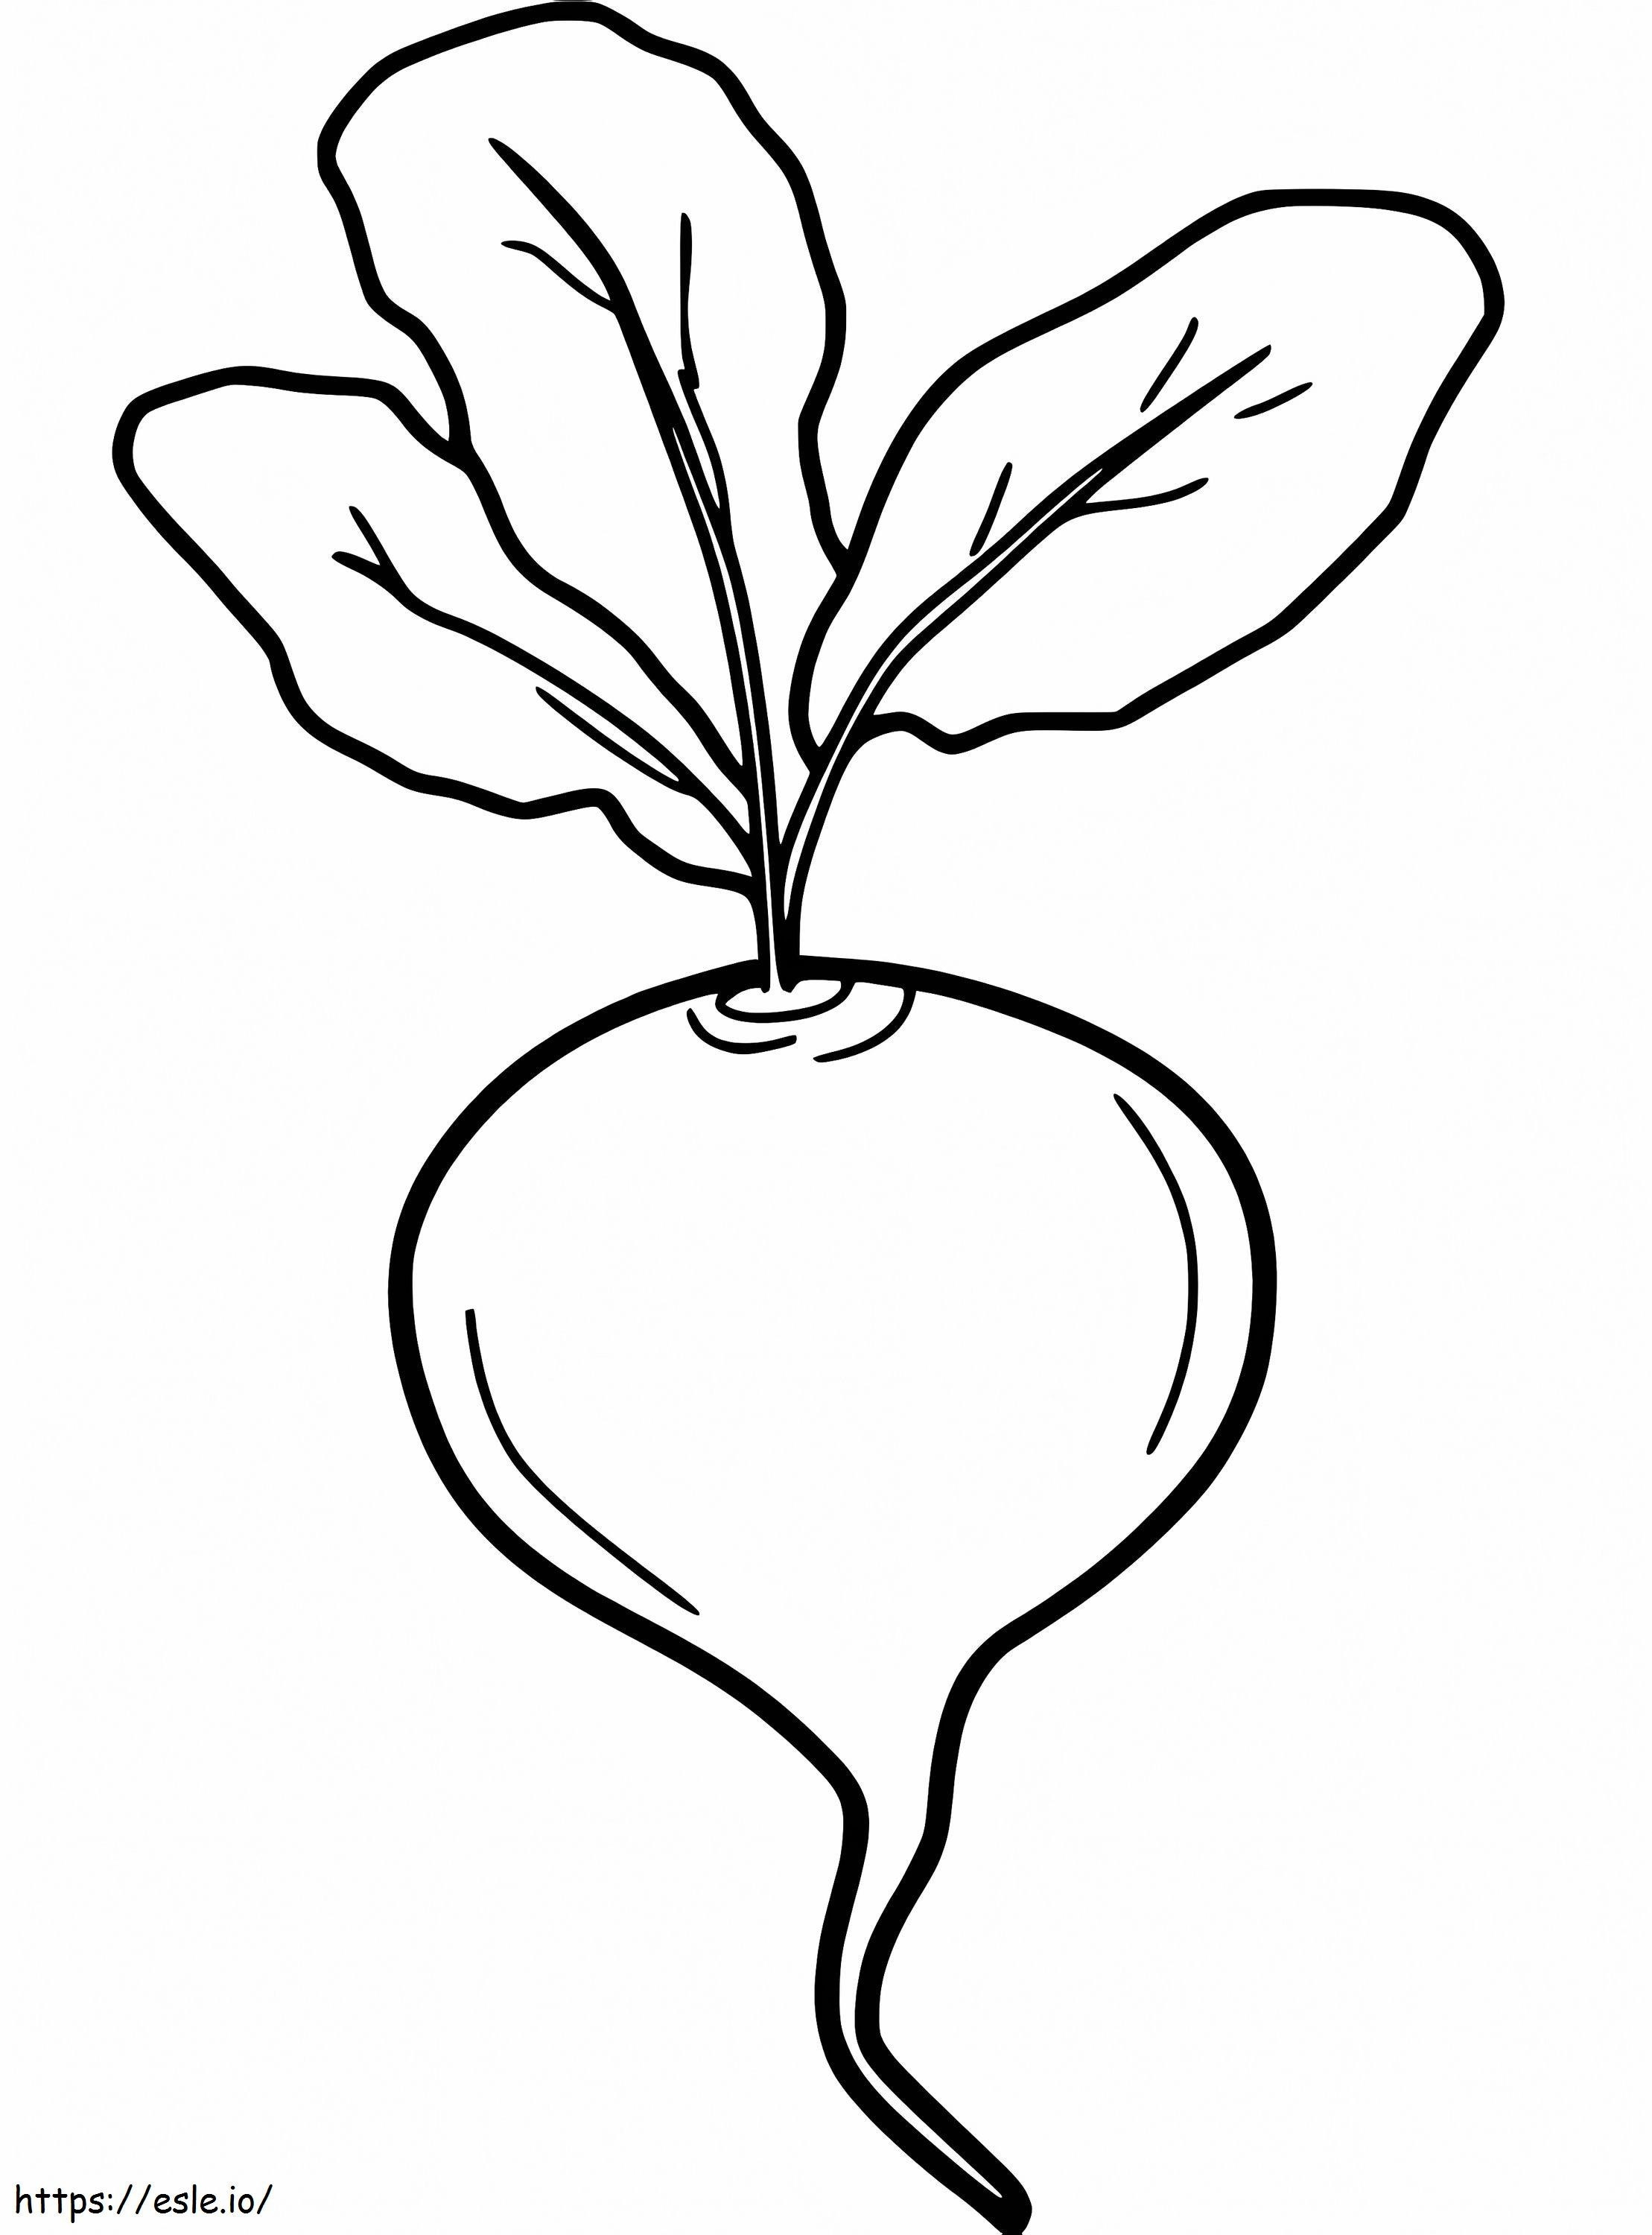 Turnip 5 coloring page